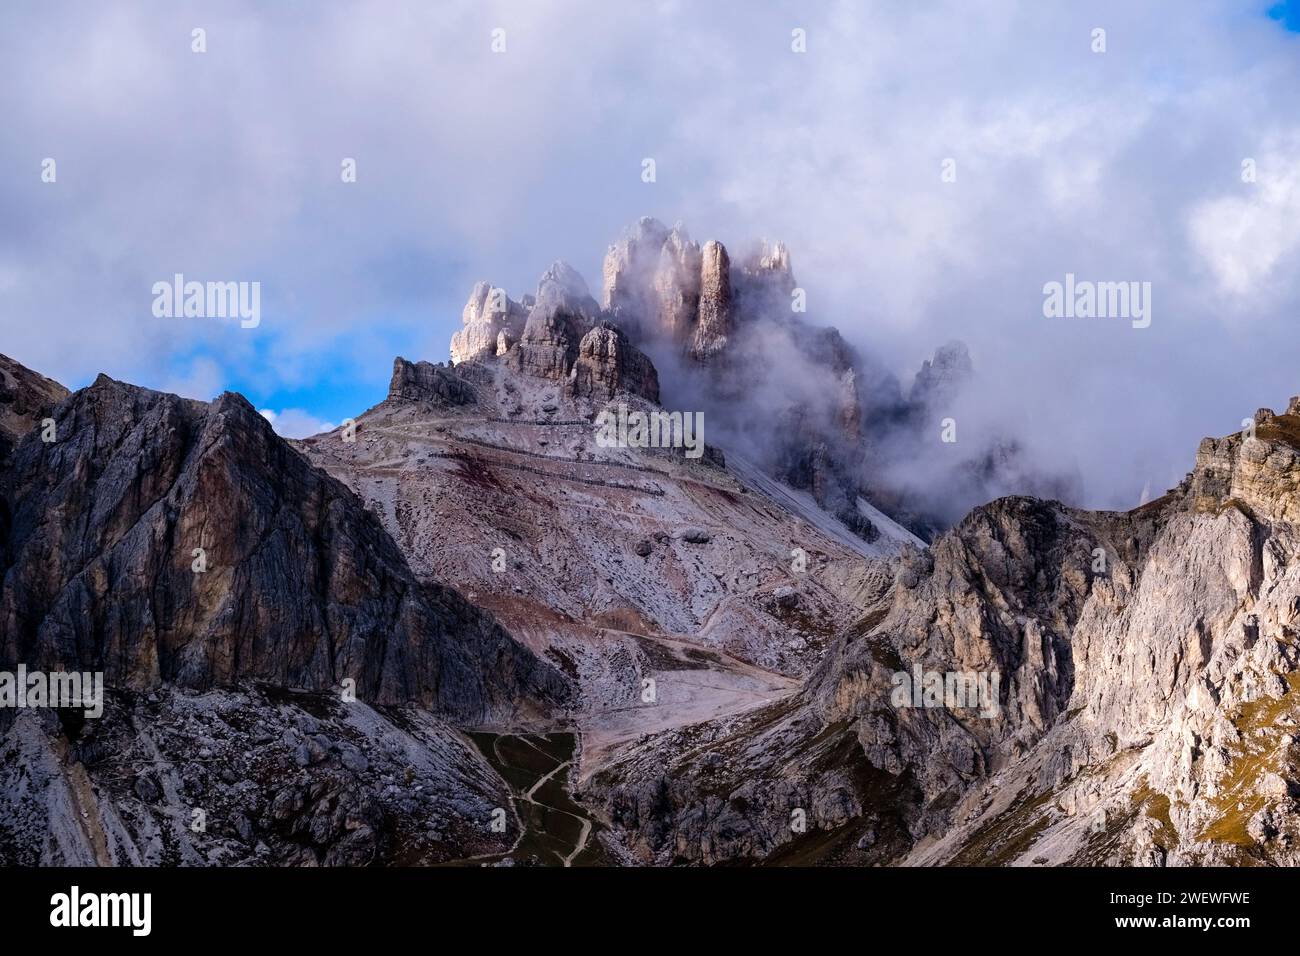 Rock faces and ridges of the mountain Grande Lagazuoi, surrounded by clouds after a rain shower in autumn. Stock Photo